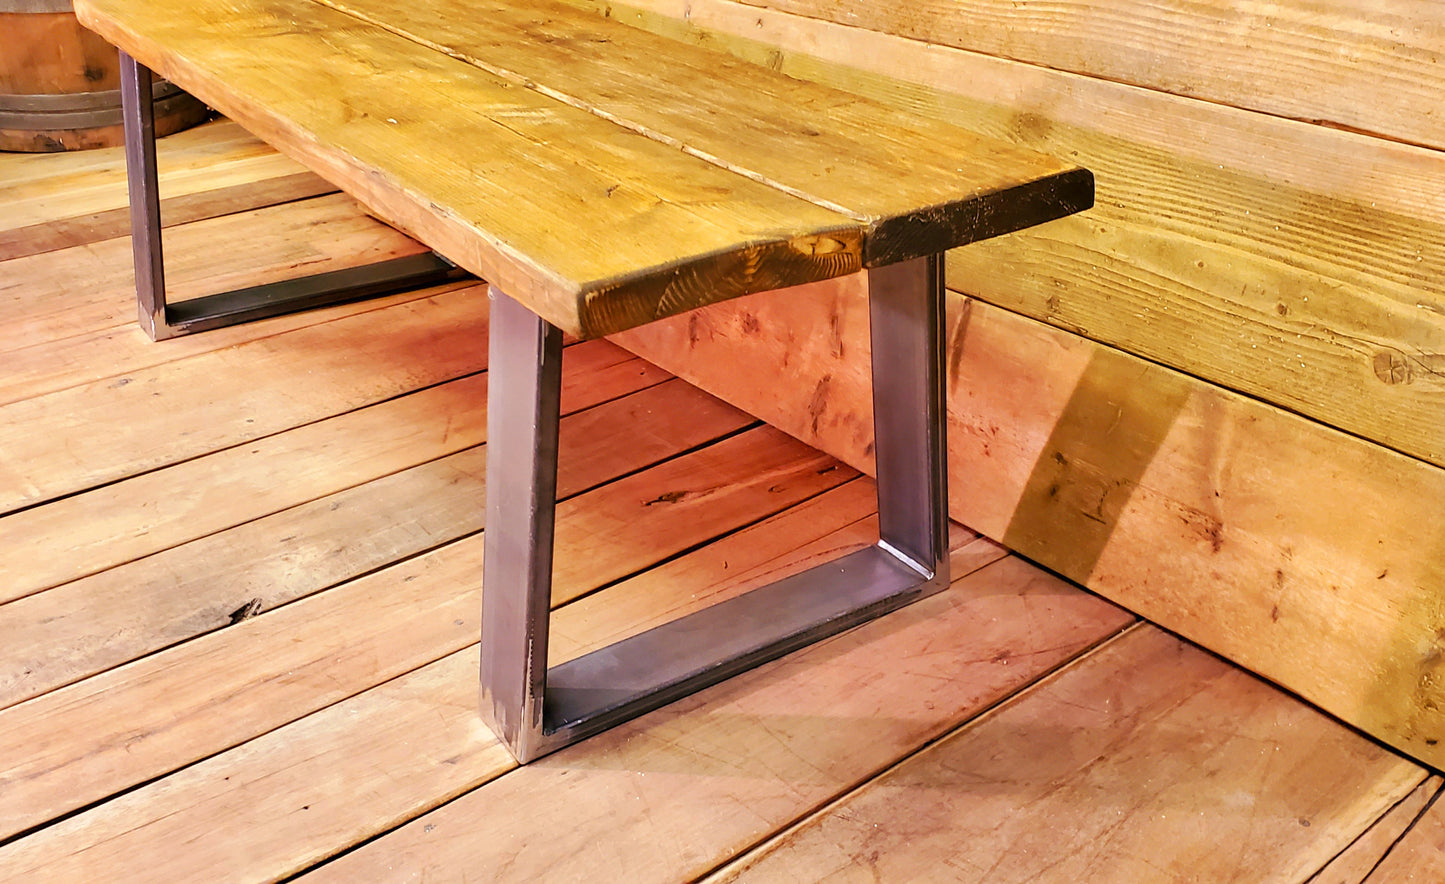 Trapezoid Table Frames  - (1 x Frame) - Spearhead Collection - Benches & Tables - Benches Stools & Tables, Industrial